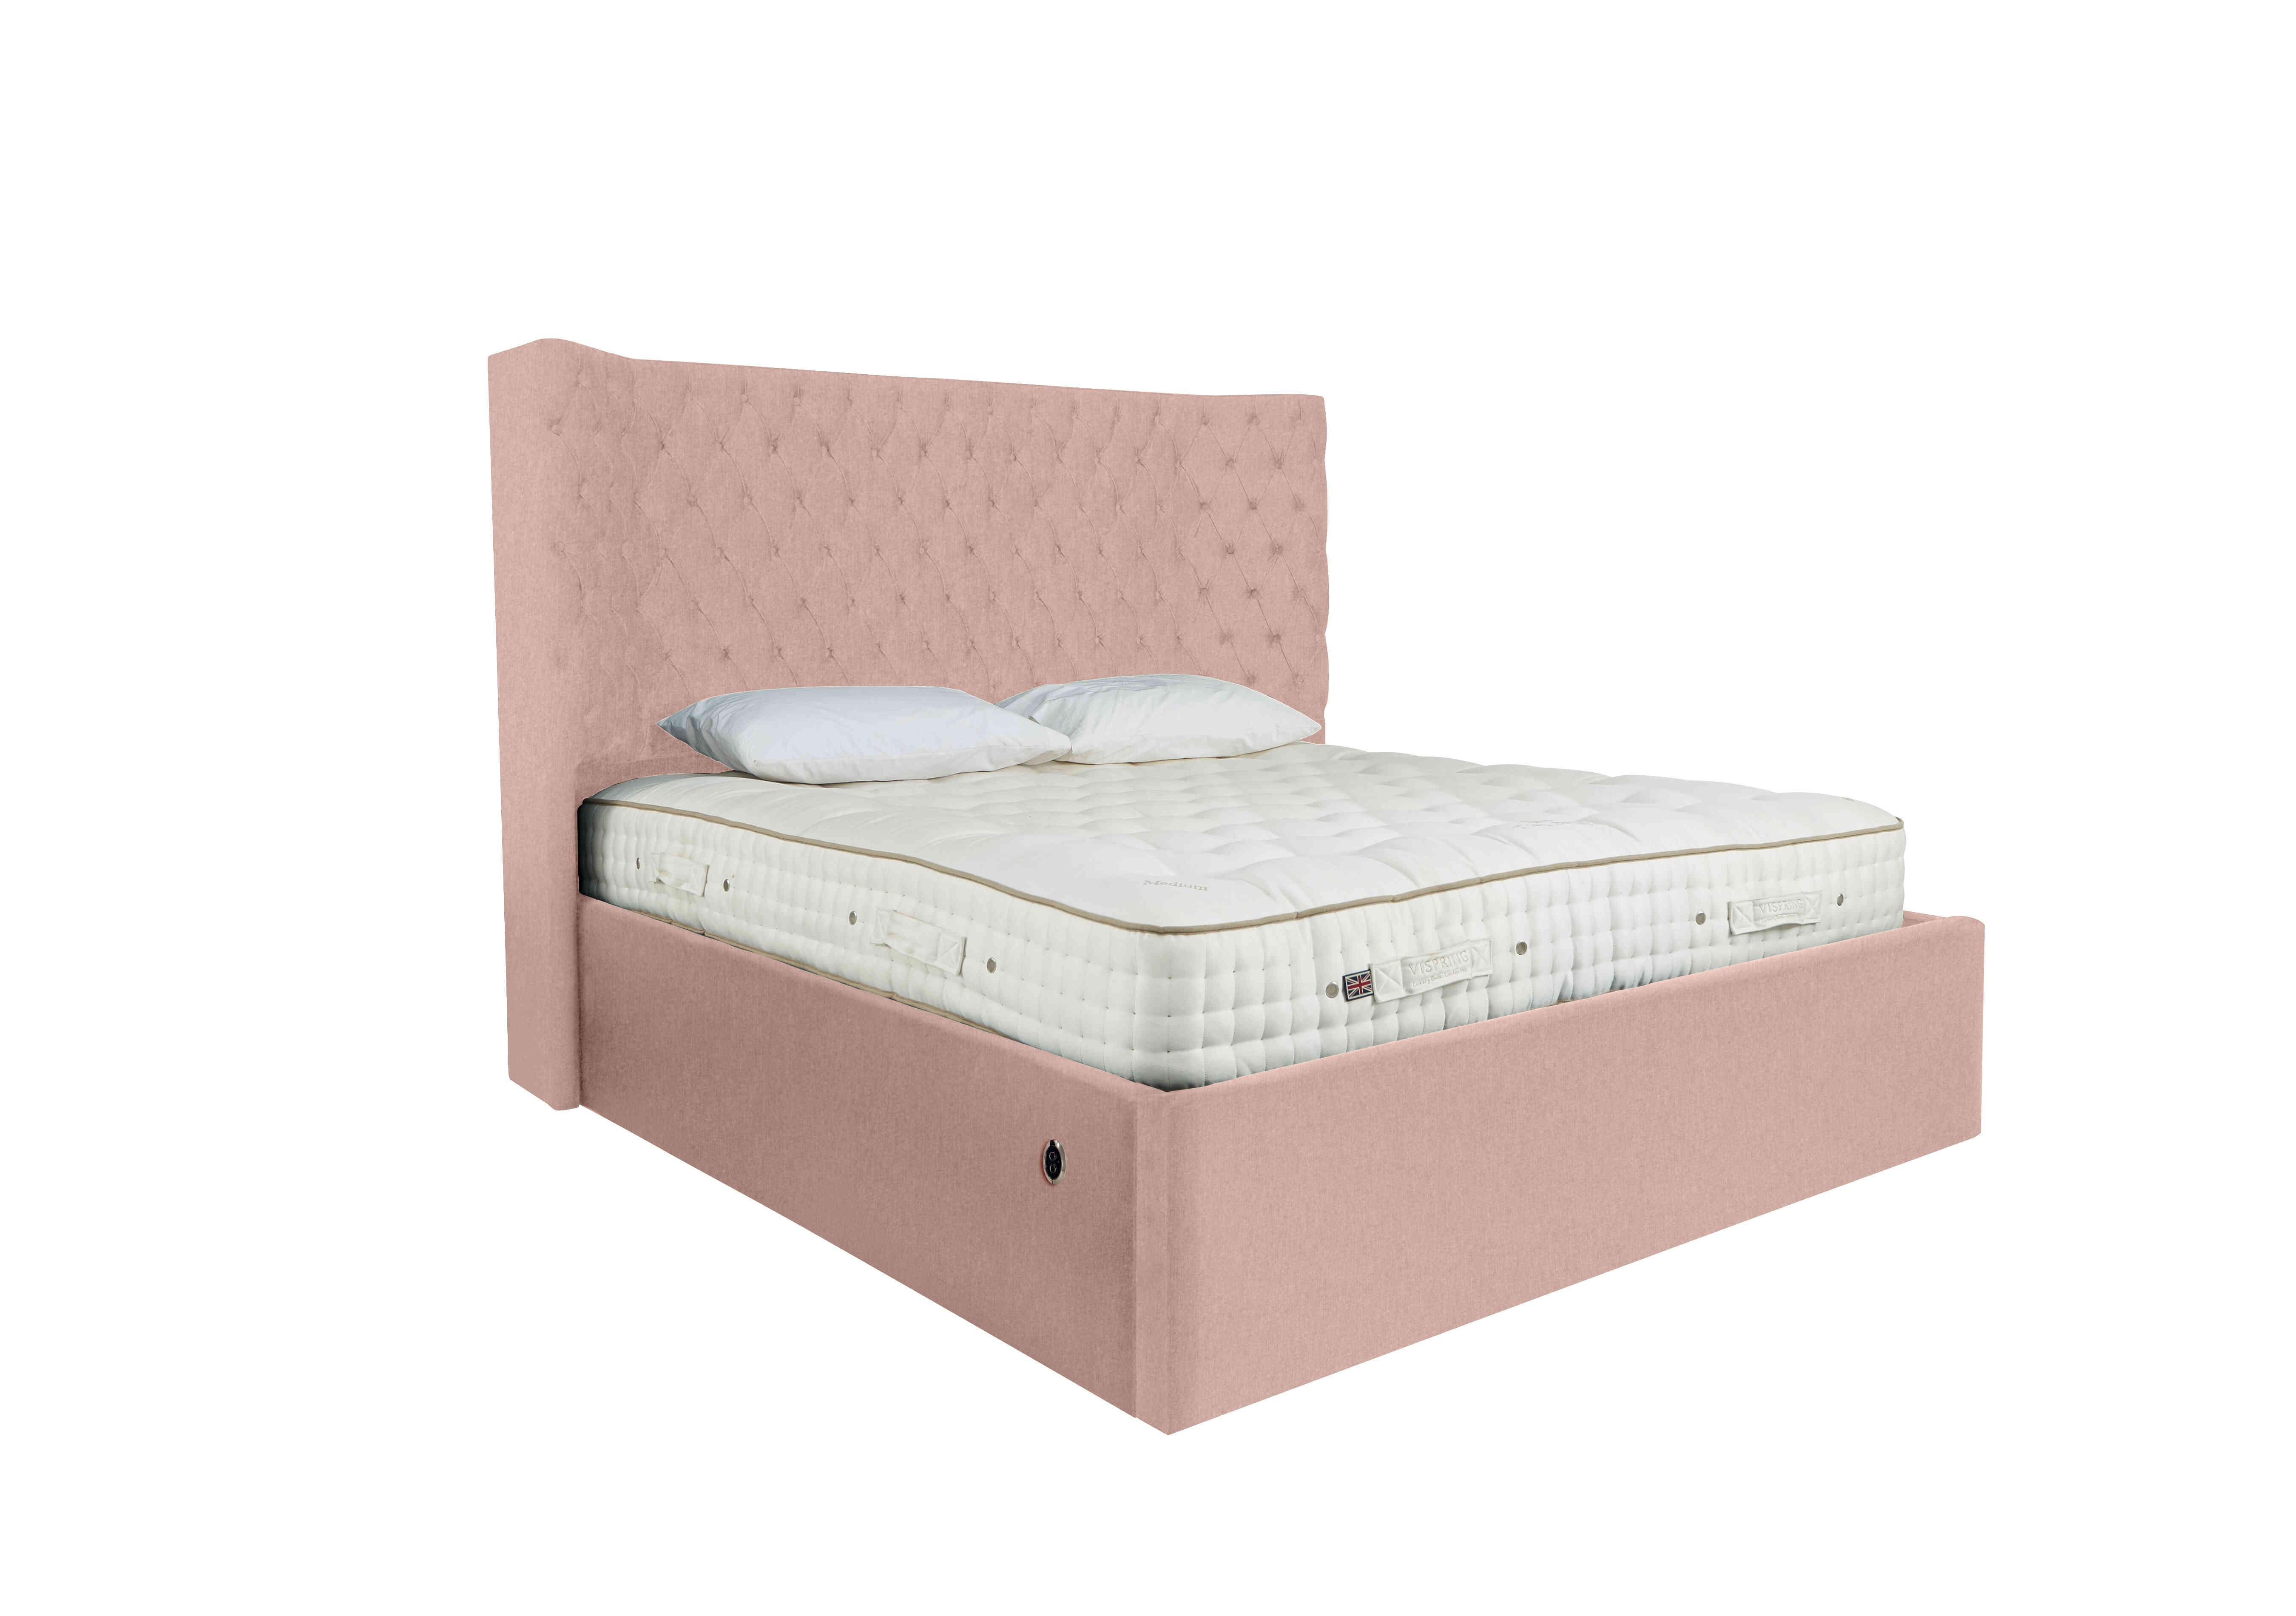 Maximus Electric Ottoman Bed Frame in Linnet Rose on Furniture Village